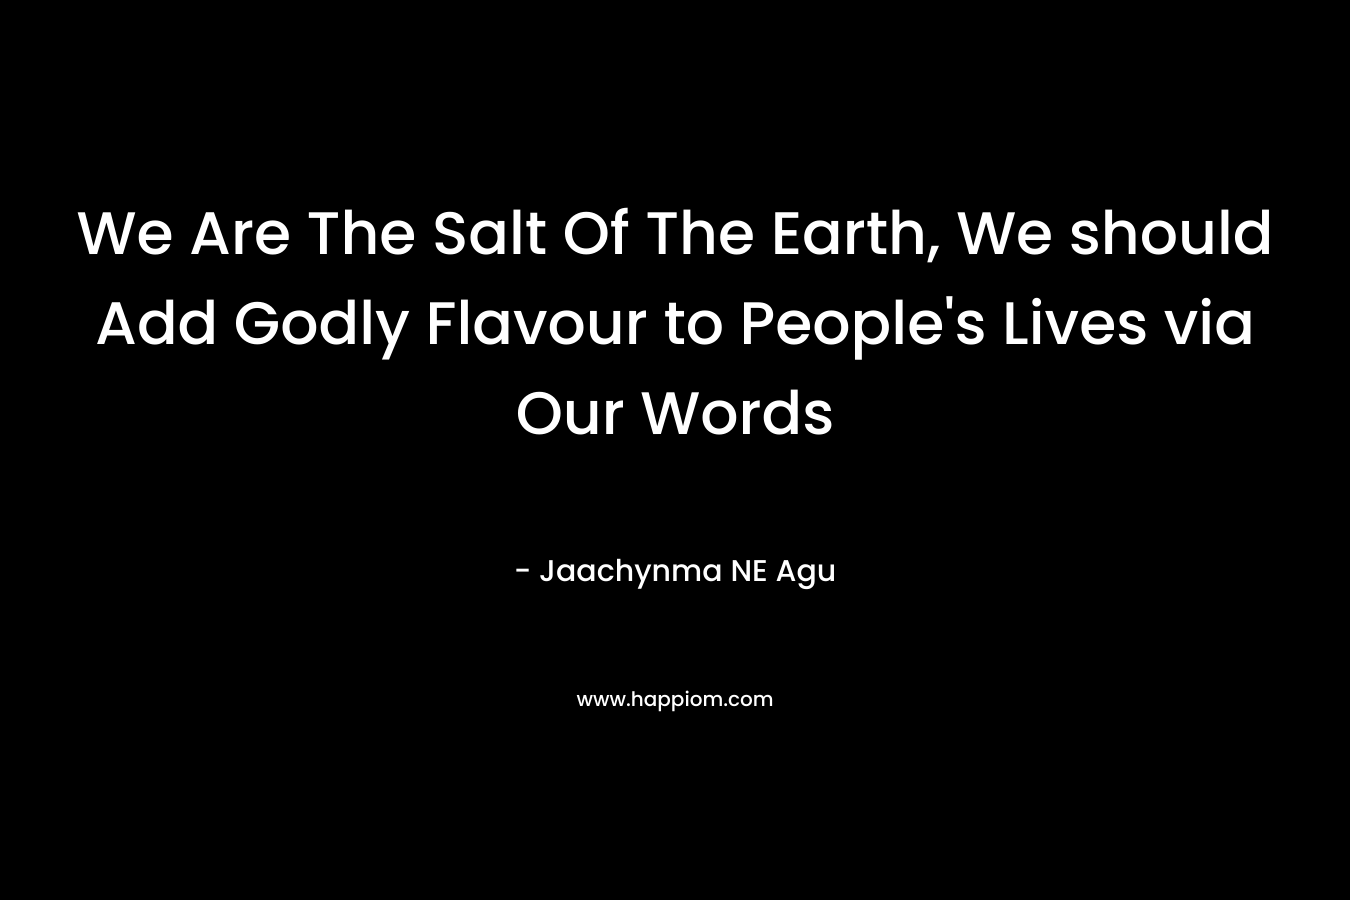 We Are The Salt Of The Earth, We should Add Godly Flavour to People's Lives via Our Words